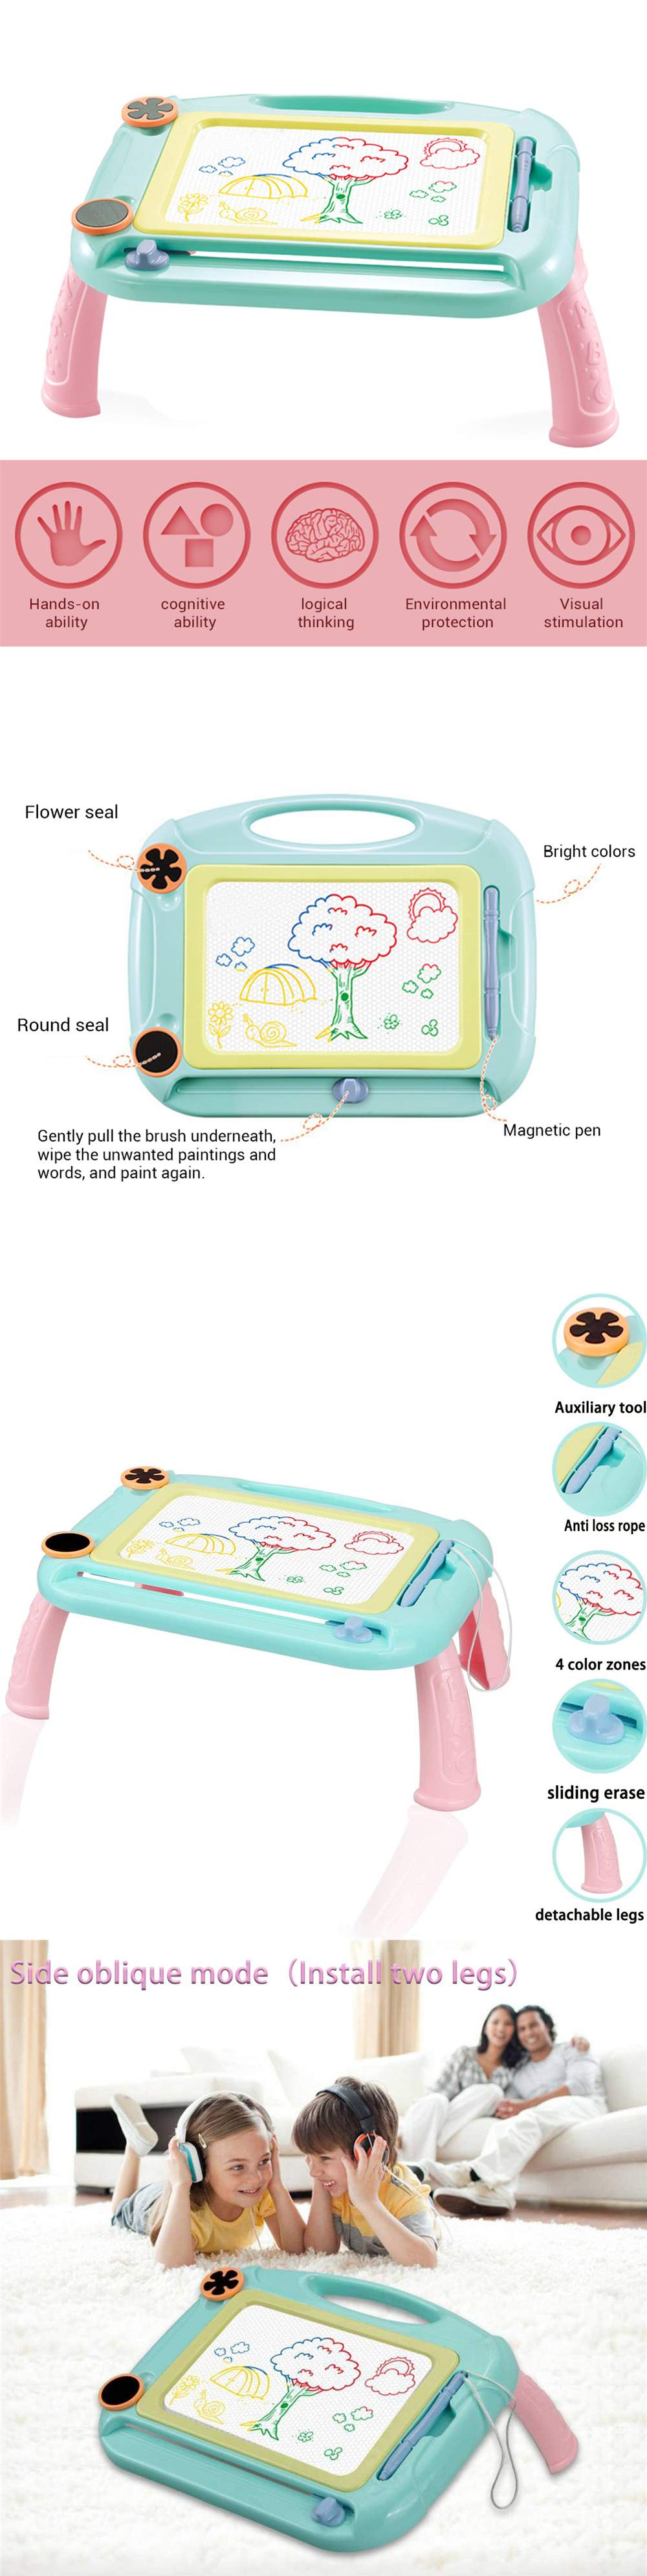 Multi-Functional-Magnetic-Drawing-Board-Desk-Painting-Doodle-Games-Writing-Painting-Pad-for-Children-1685427-1